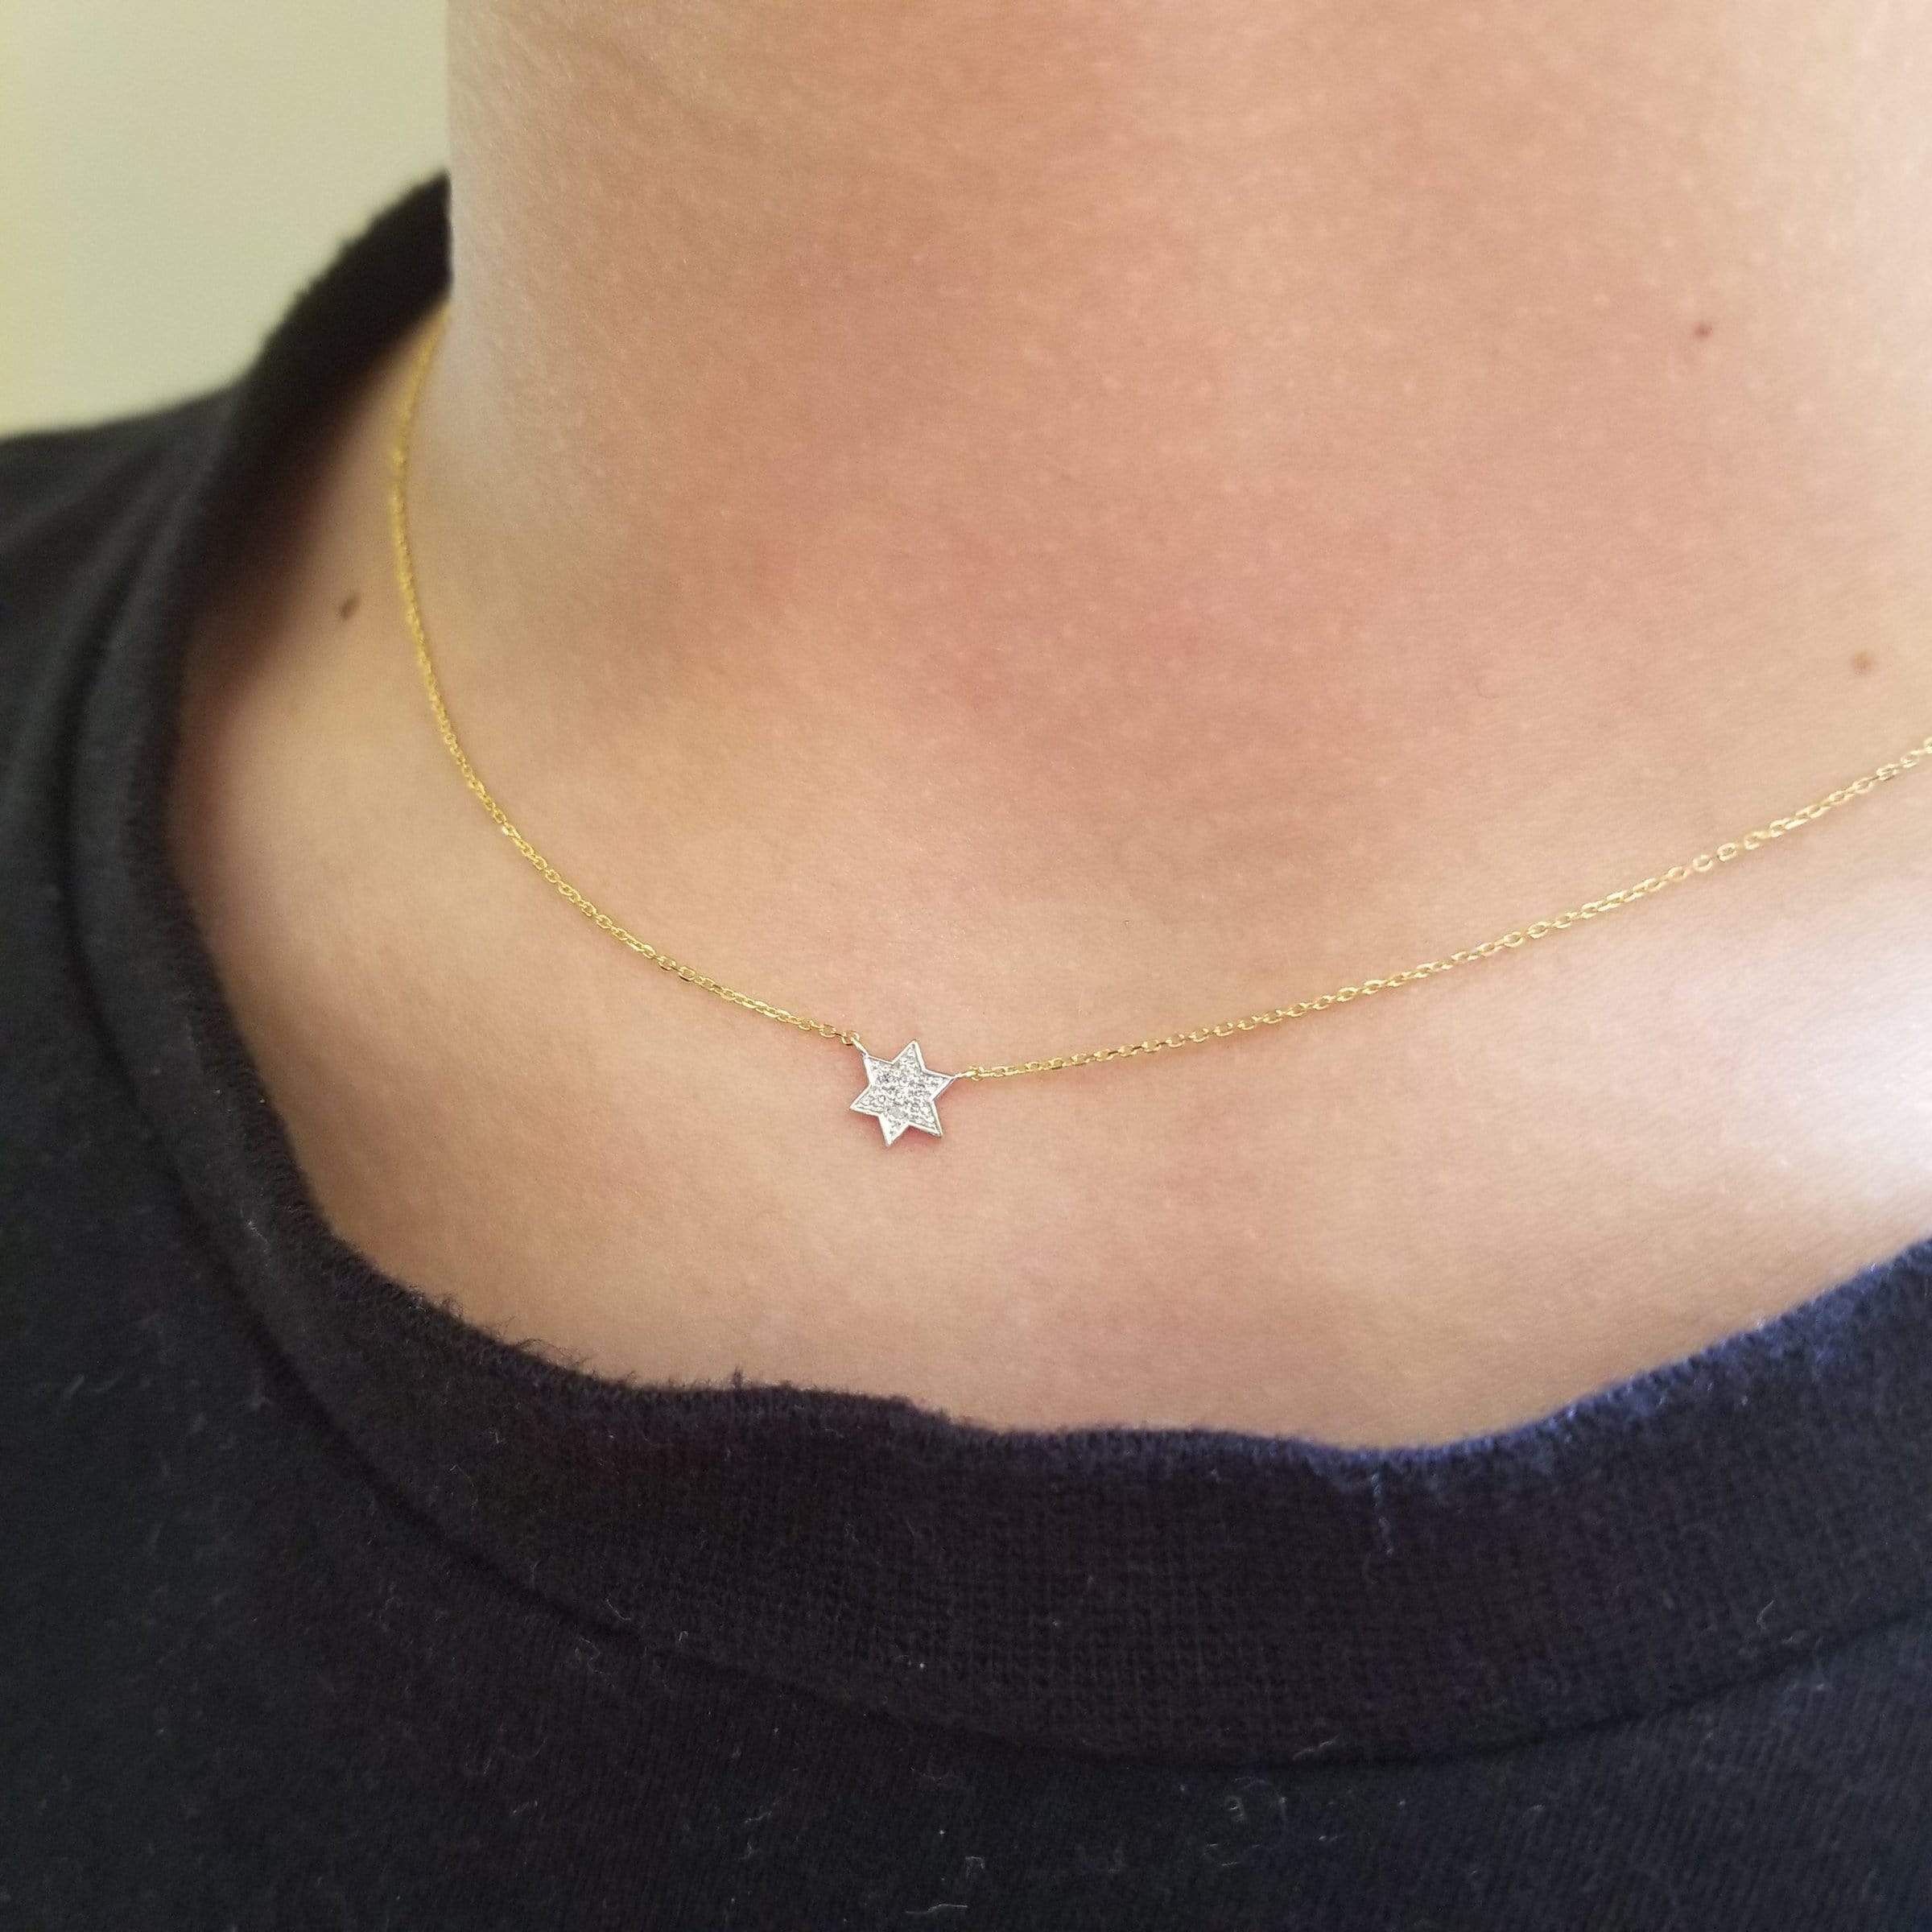 Petite Diamond Jewish Star Necklace in 14k Gold, White Gold or Rose Go